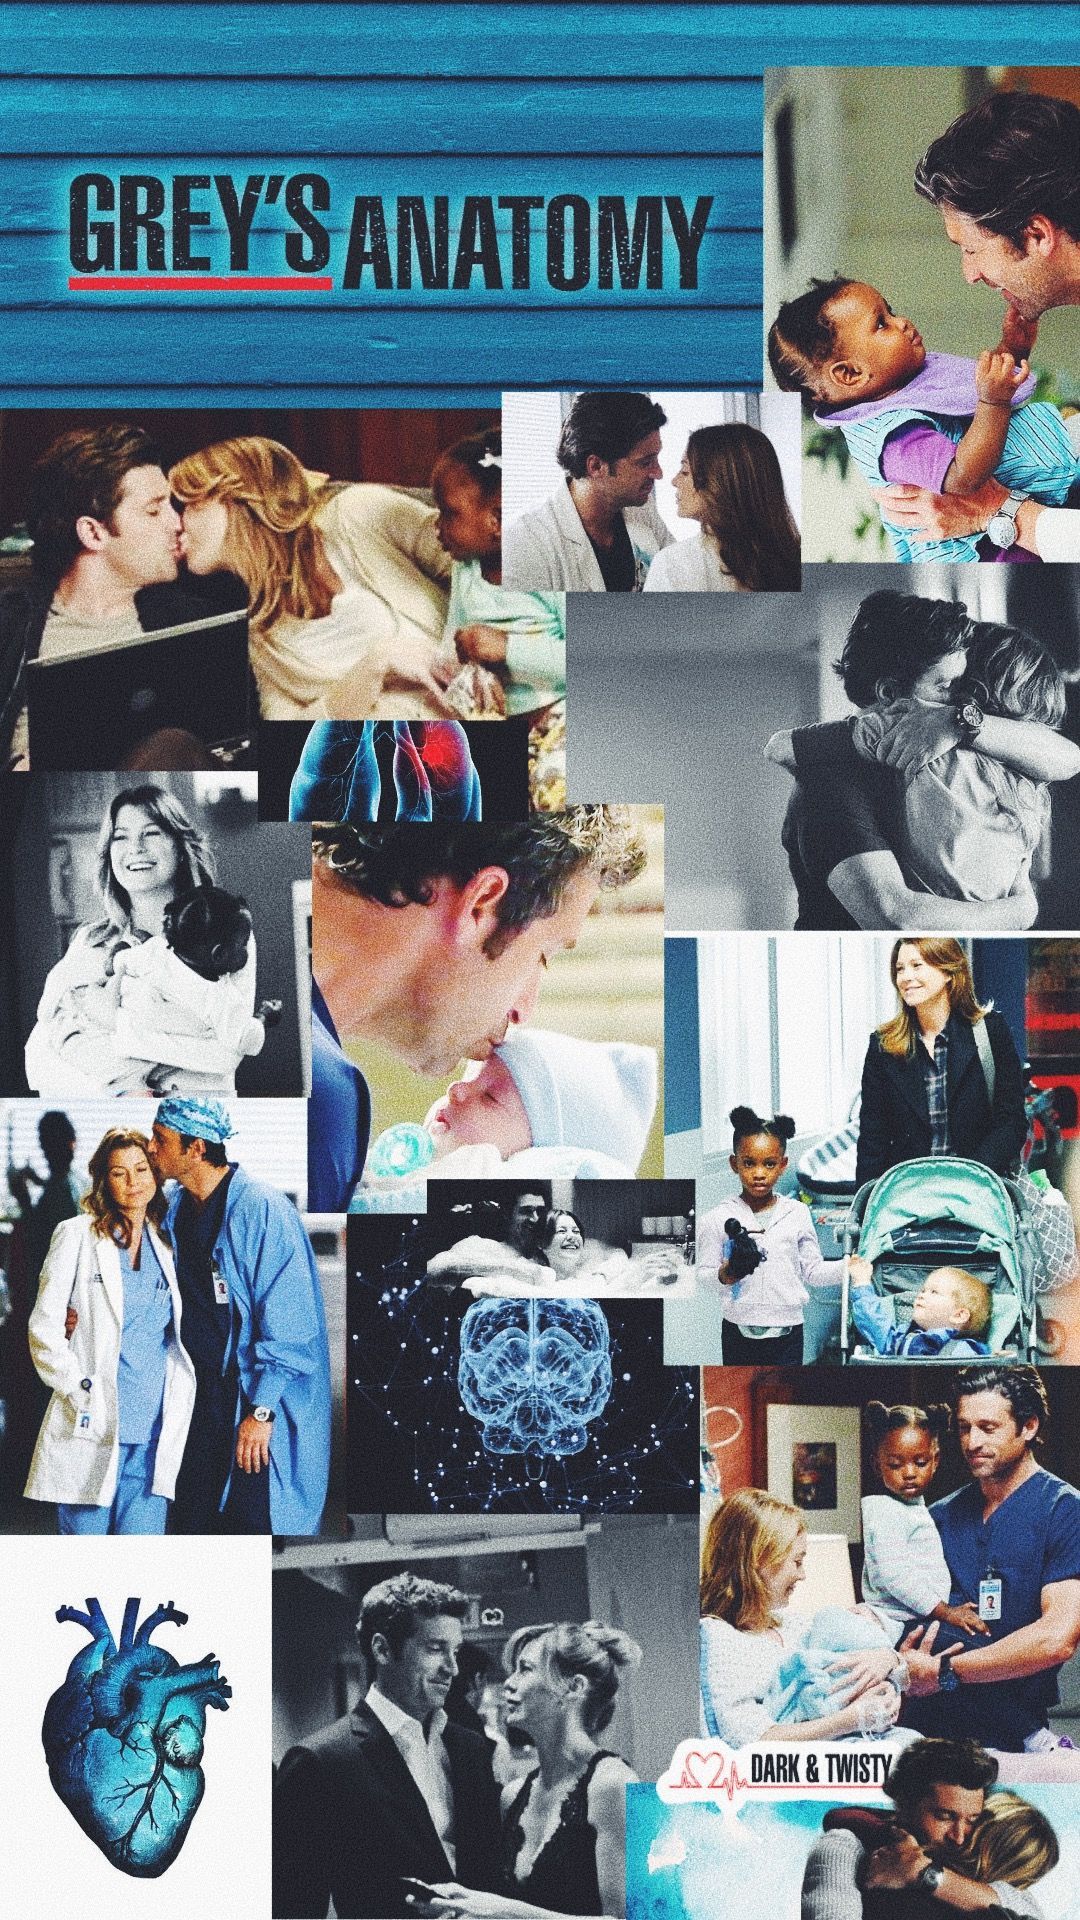 A collage of Grey's Anatomy characters, with the show's name at the top. - Grey's Anatomy